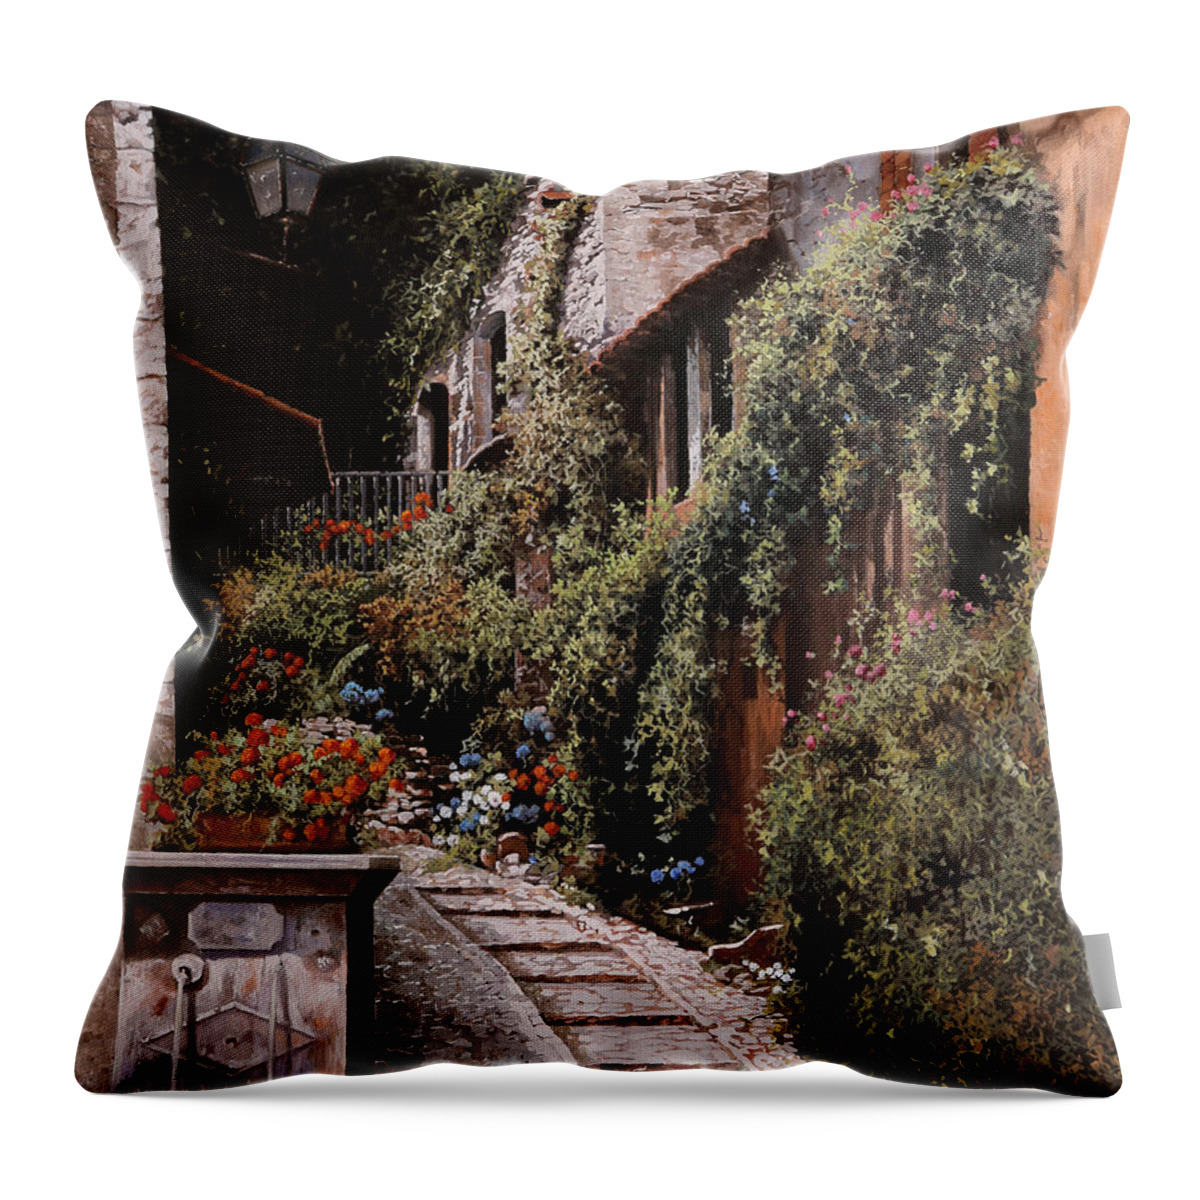 Fountain Throw Pillow featuring the painting La Fontanella by Guido Borelli